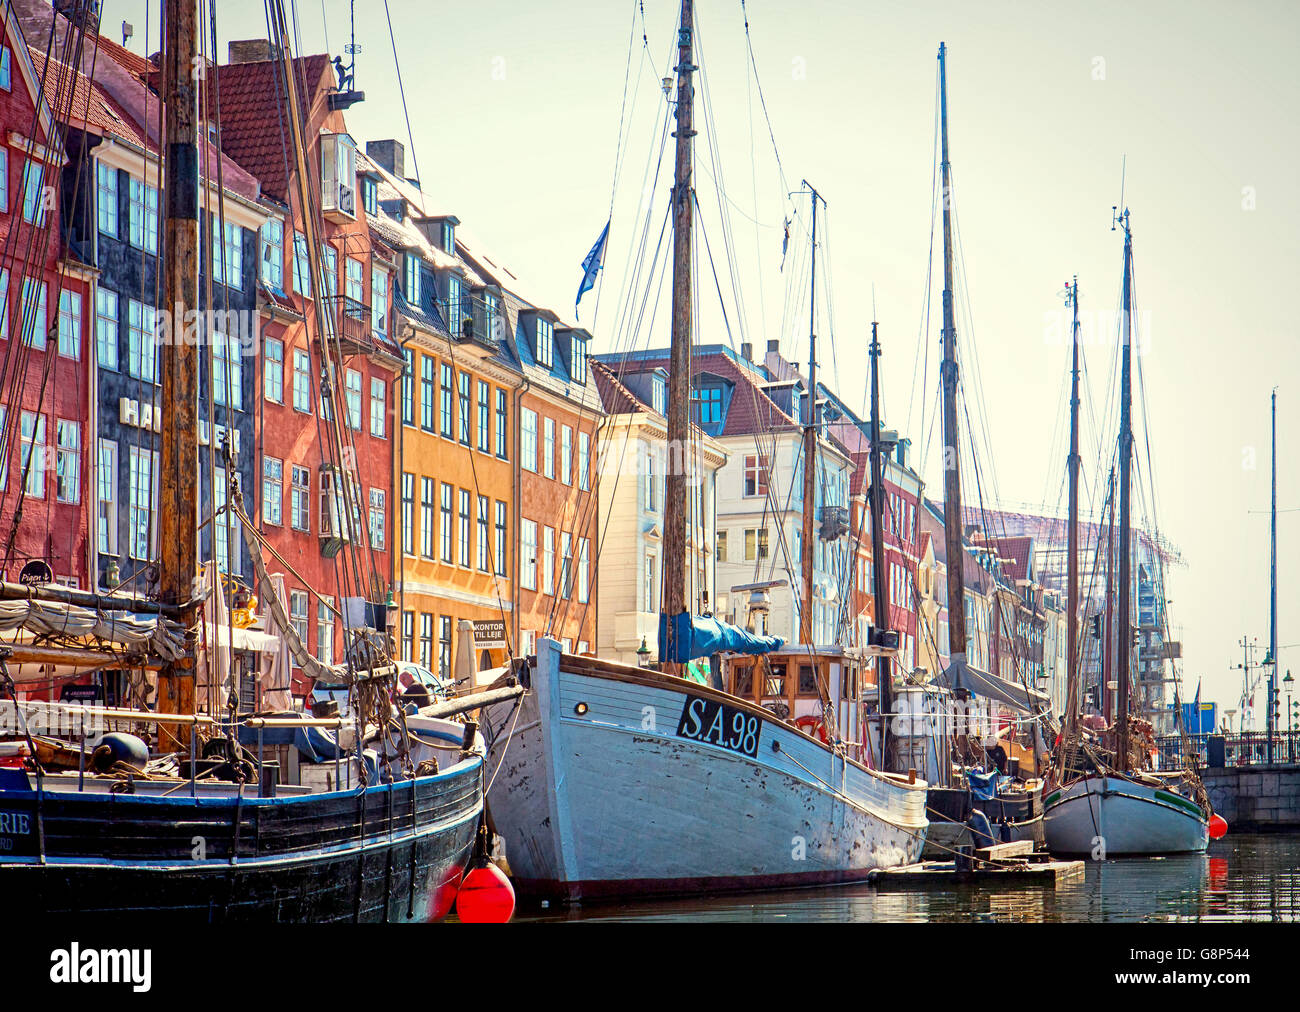 Copenhagen, Nyhavn famous landmark and entertainment district with antique colorful buildings and an old ships moored Stock Photo